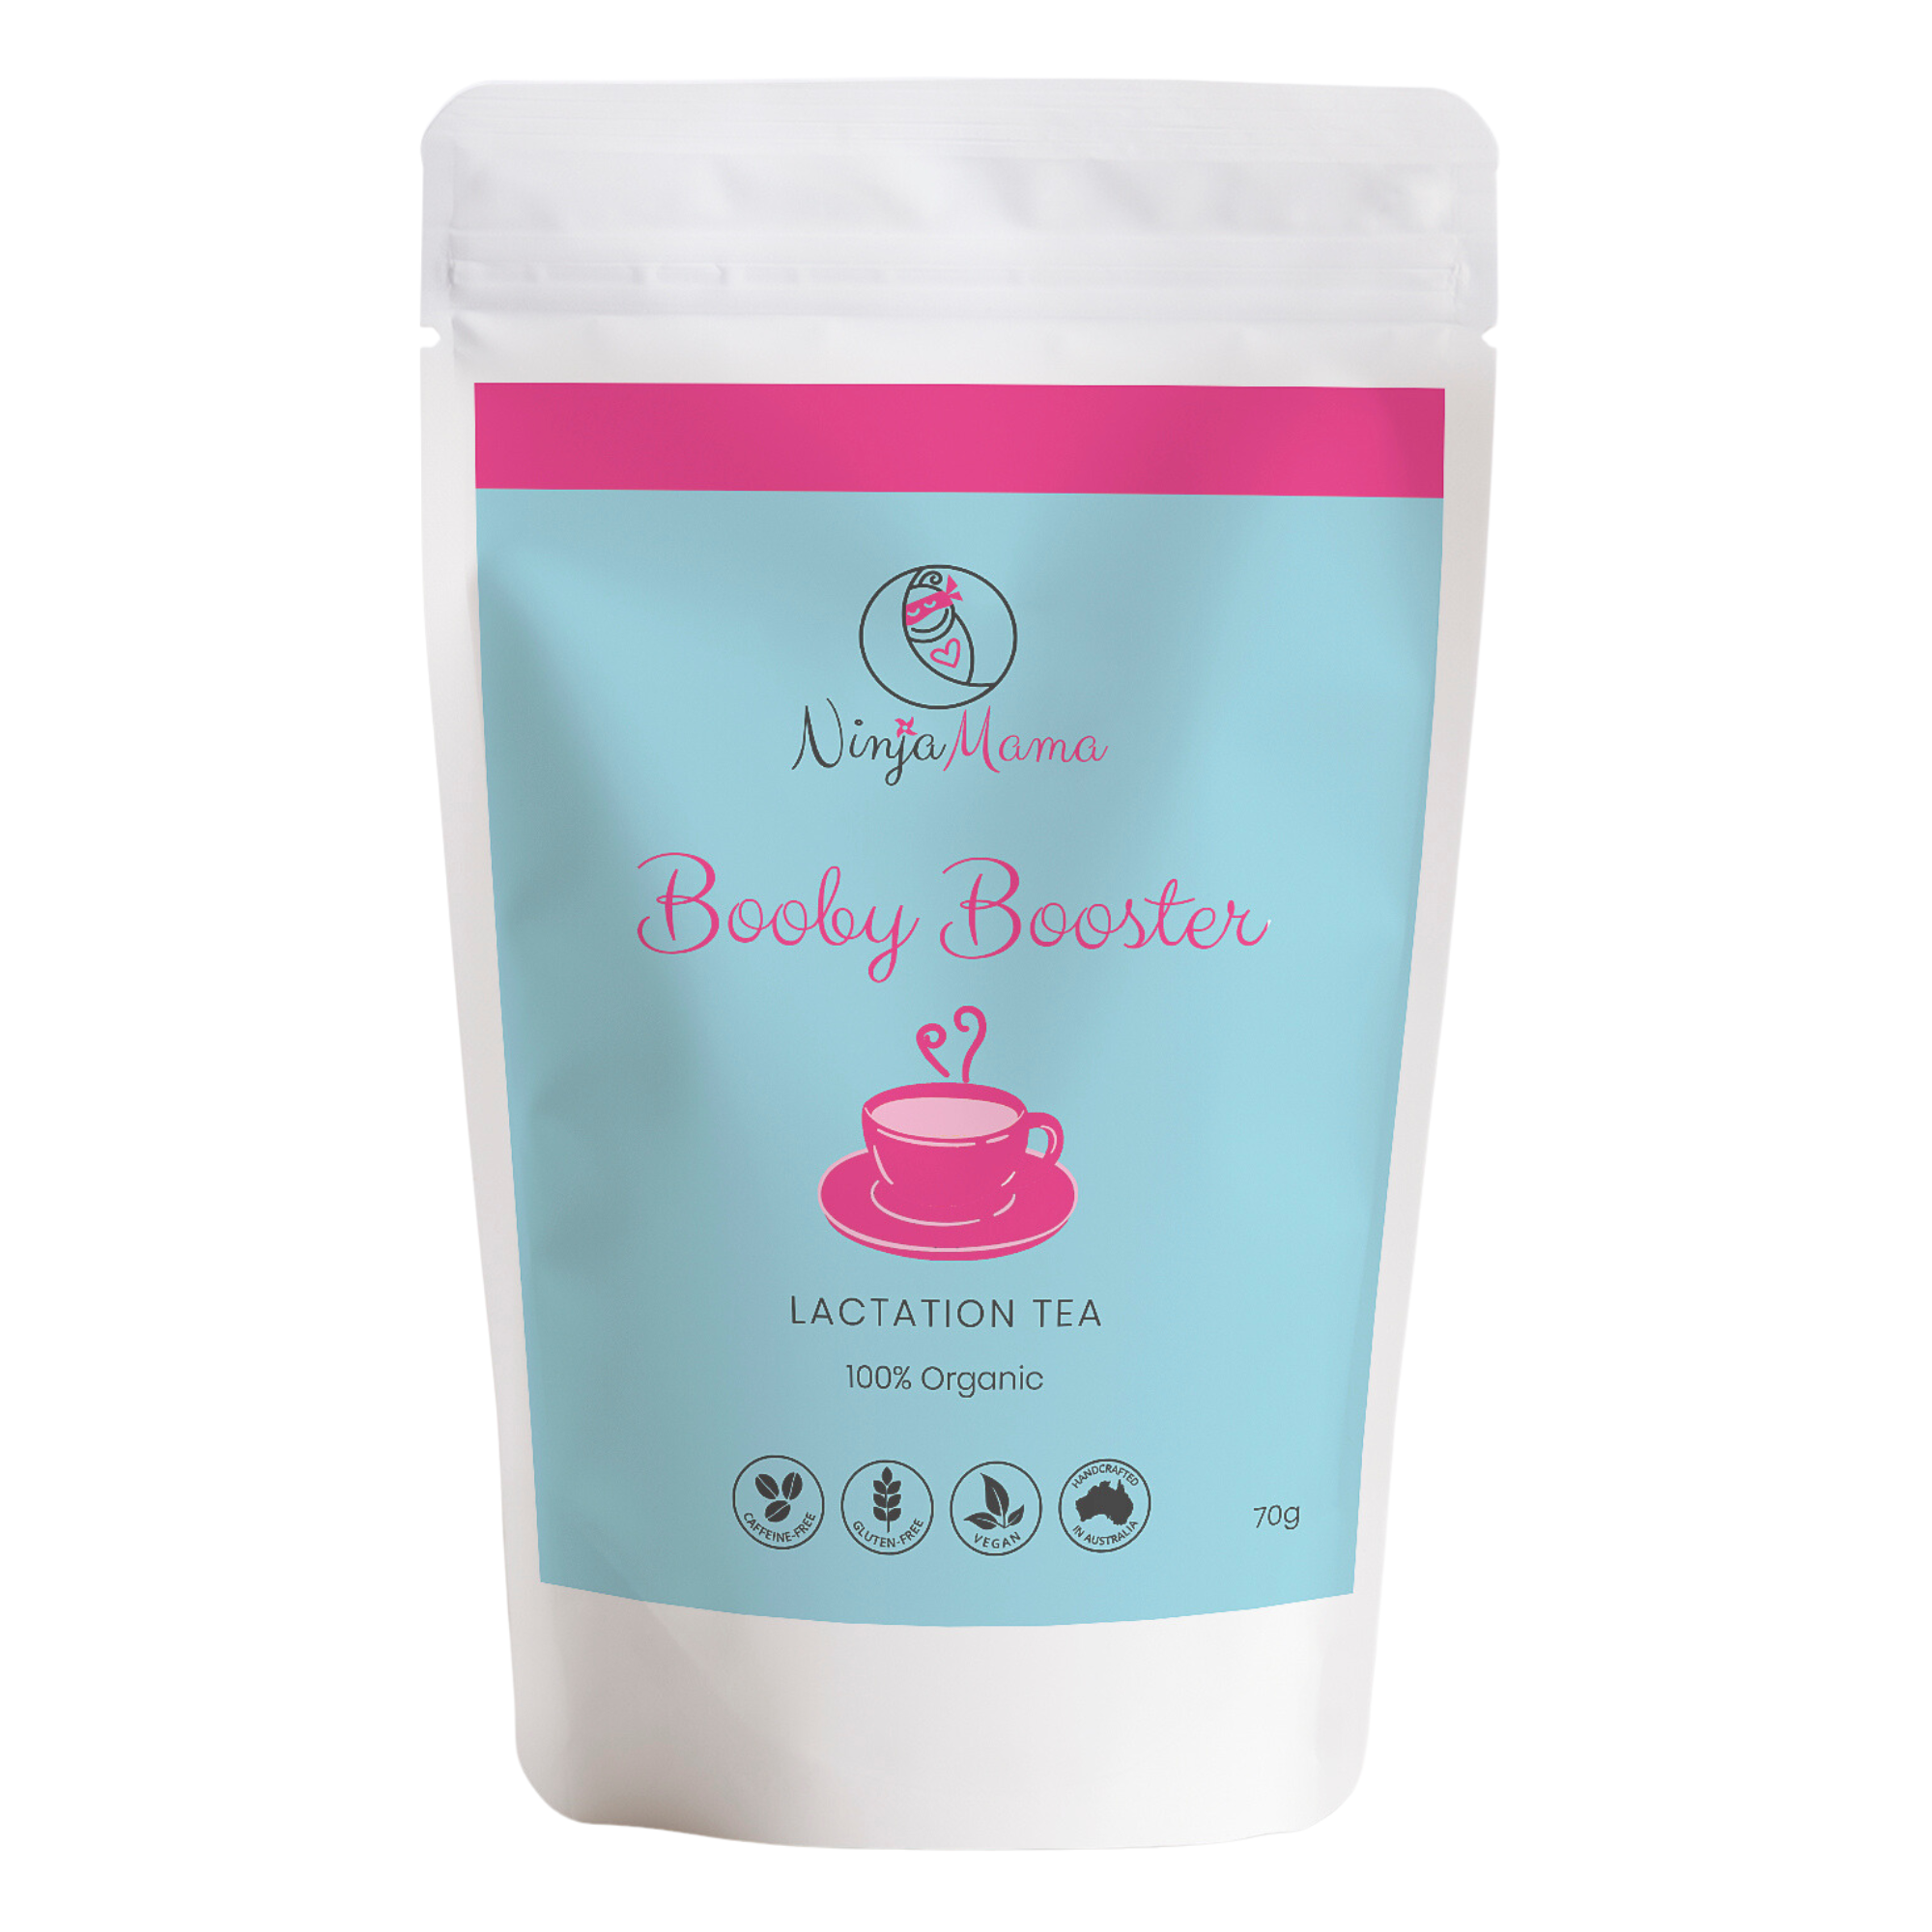 Ninja Mama Disposable Postpartum Mesh Underwear (Without Pad) • Bubsessed :  Postpartum and Baby Products, Gifts & Hampers in Australia